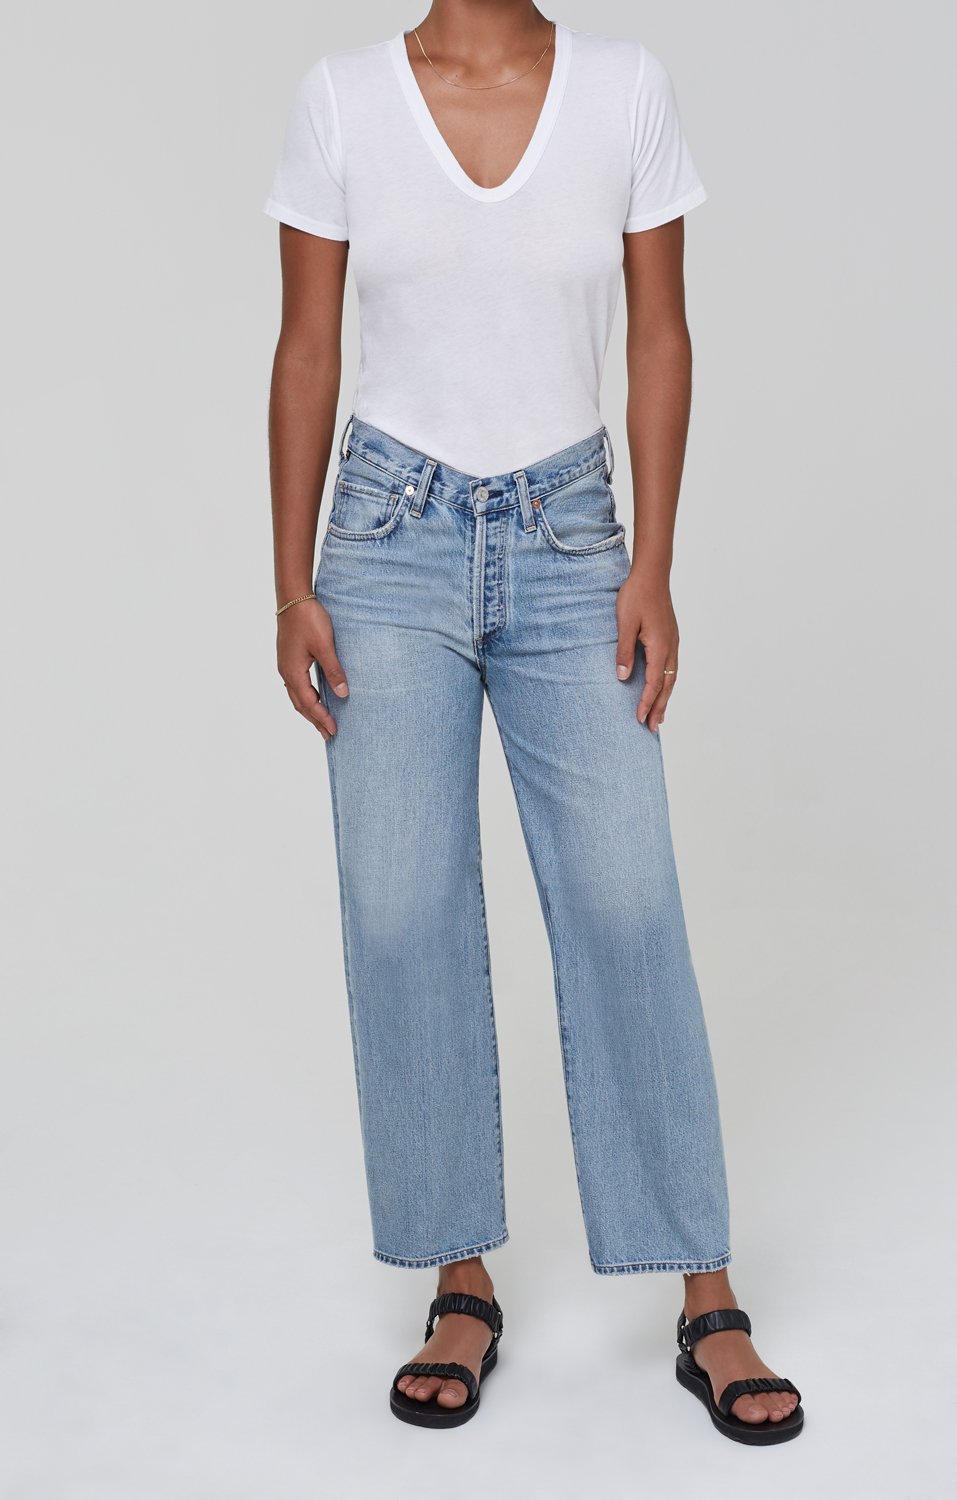 Citizens of Humanity - Elle V-Front Jeans in Issa